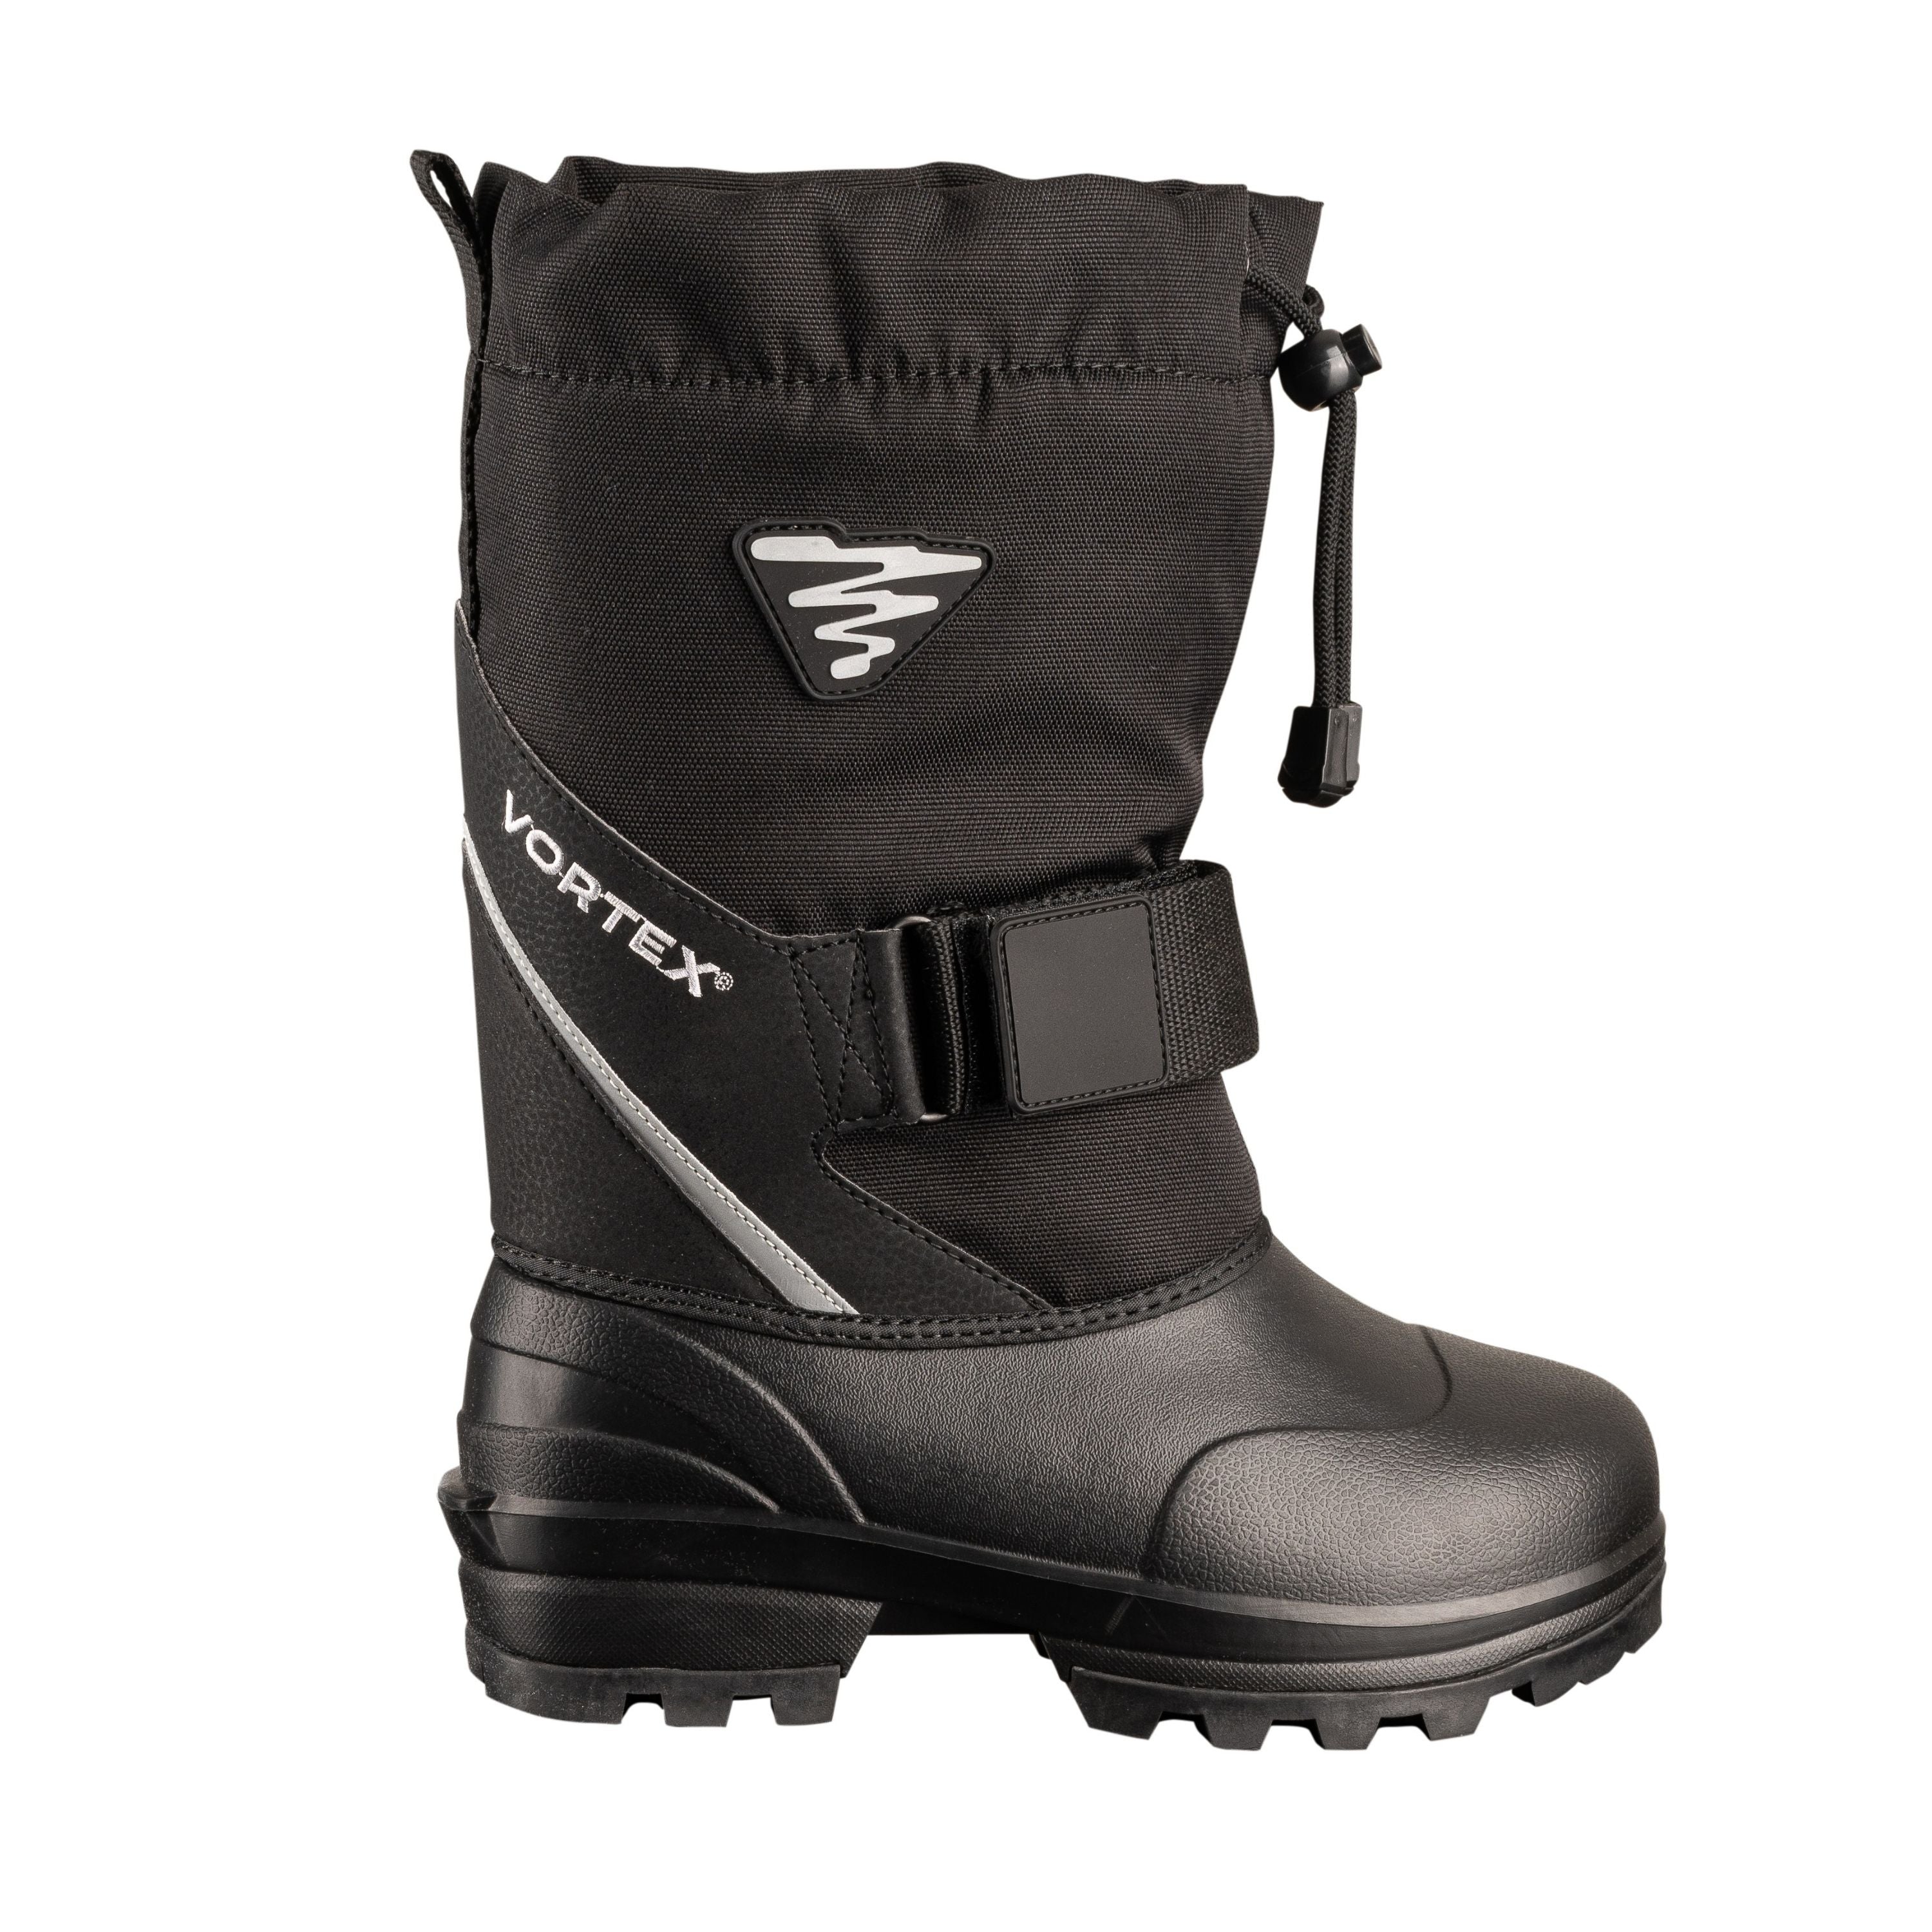 "Storm" Winter boots - Youth's